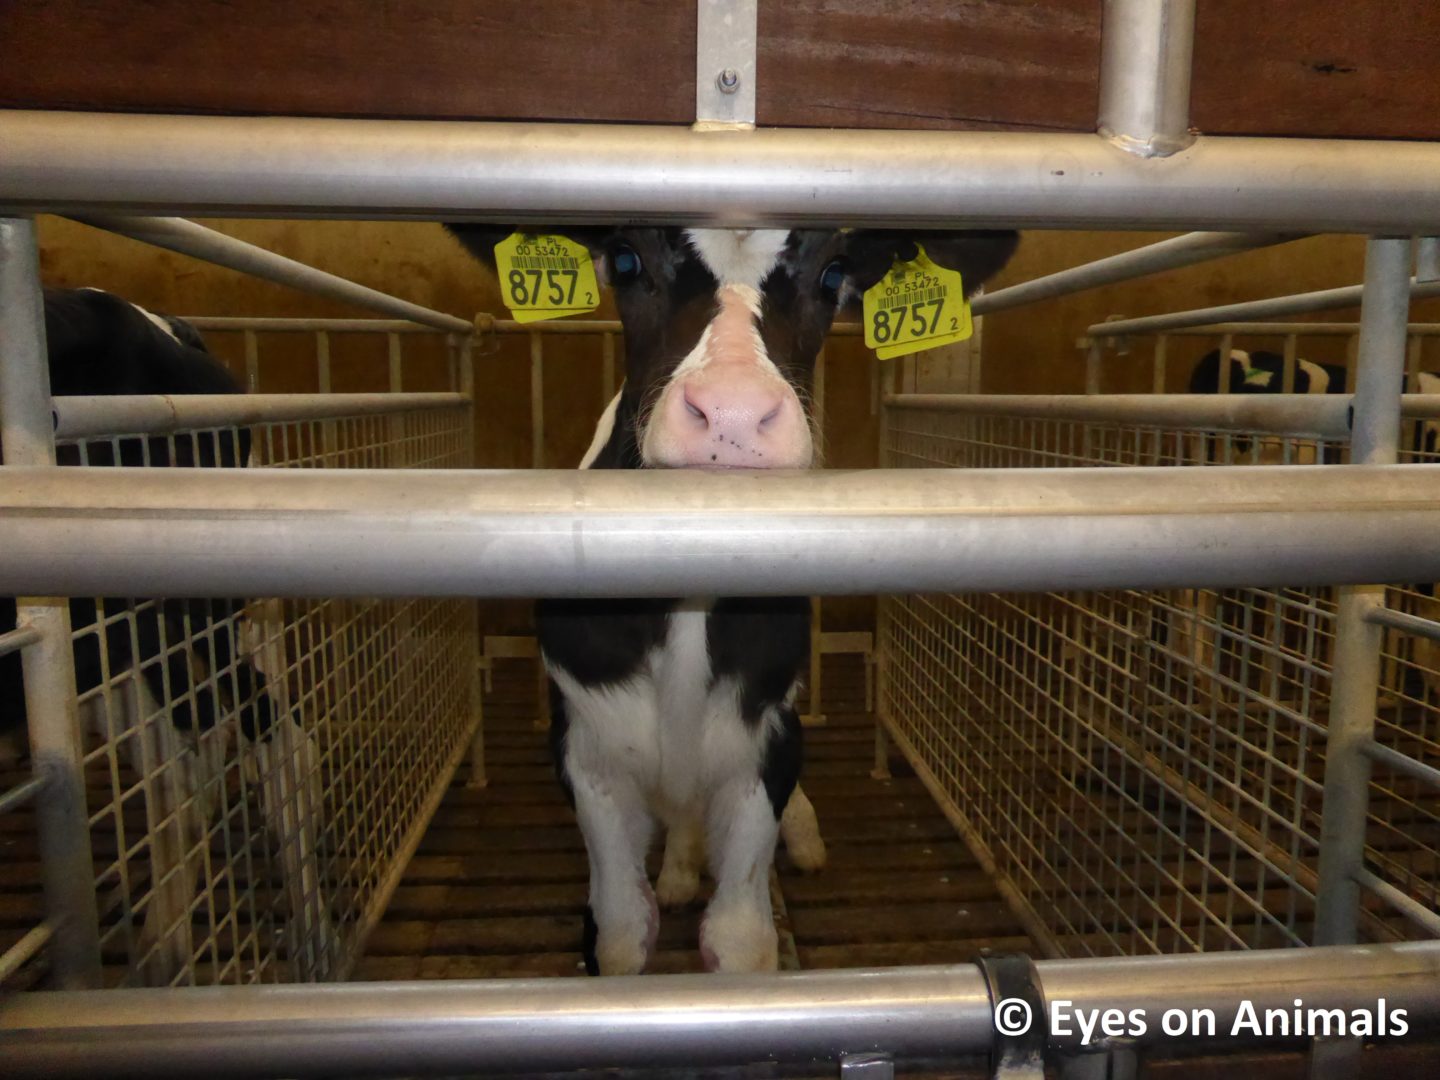 Revealed: the suffering faced by Scotland's farm animals during live transport 6